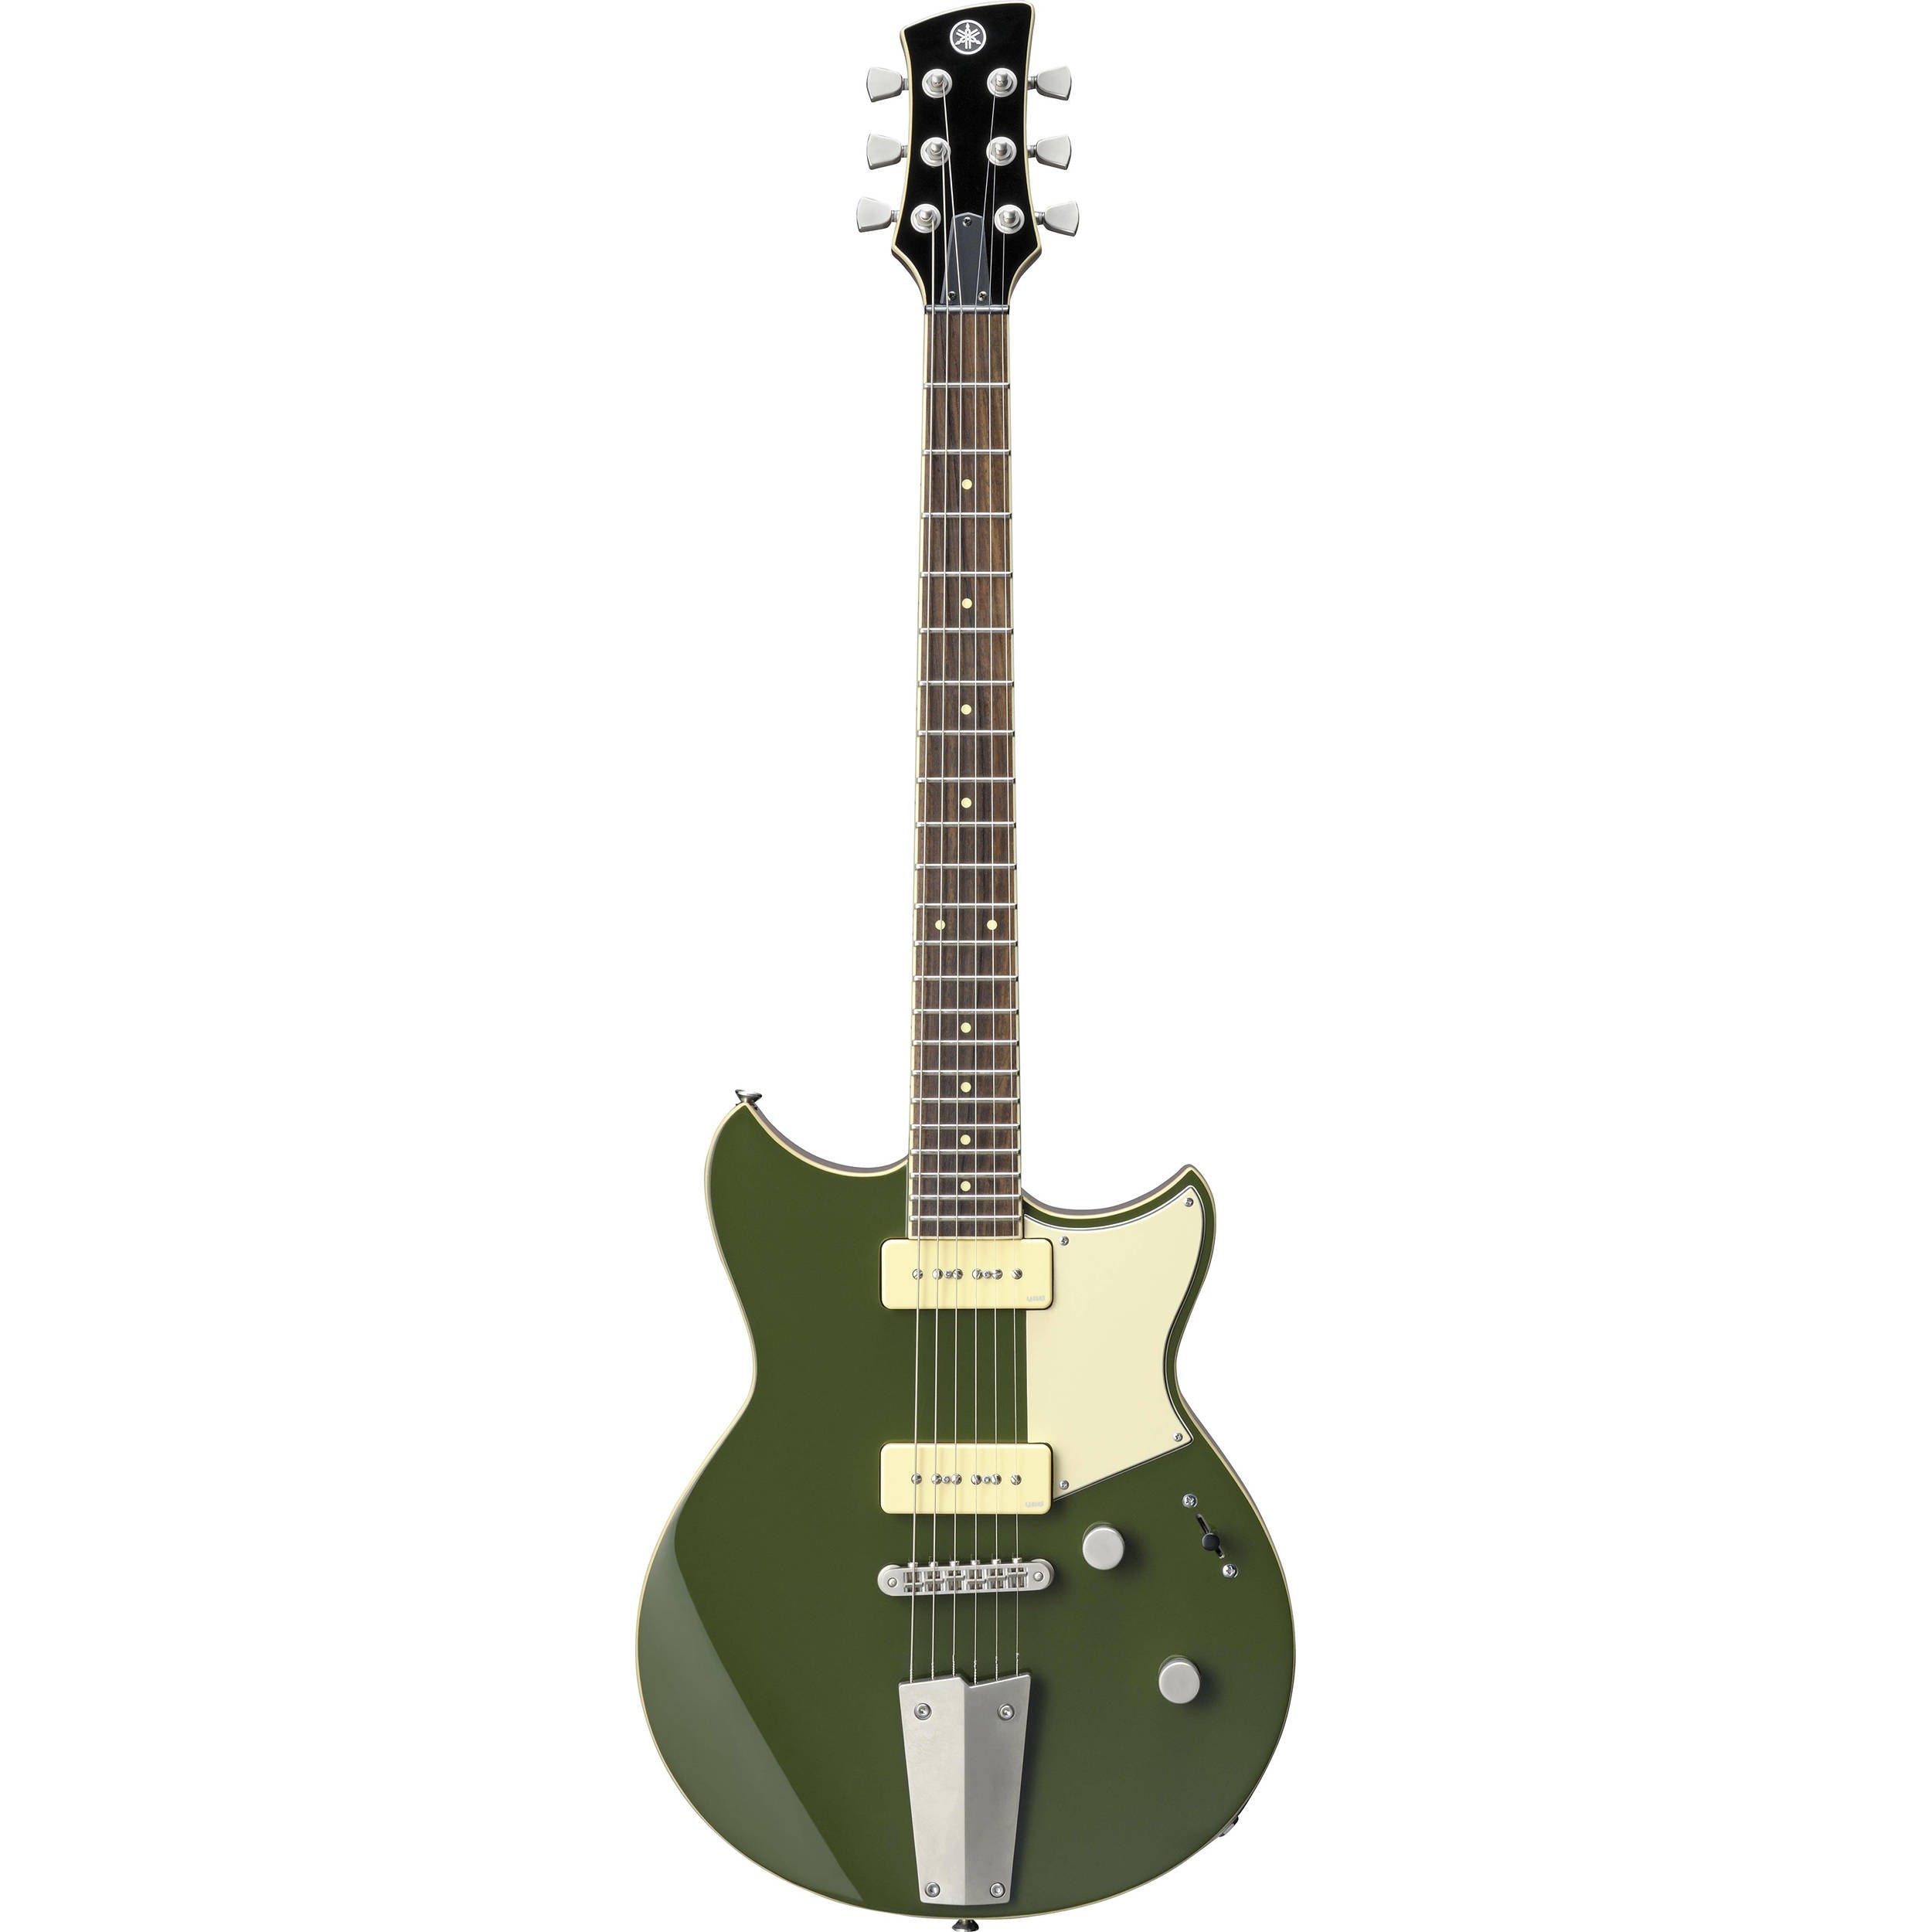 Yamaha Revstar RS502T Electric Guitar with P90's - Bowden Green 